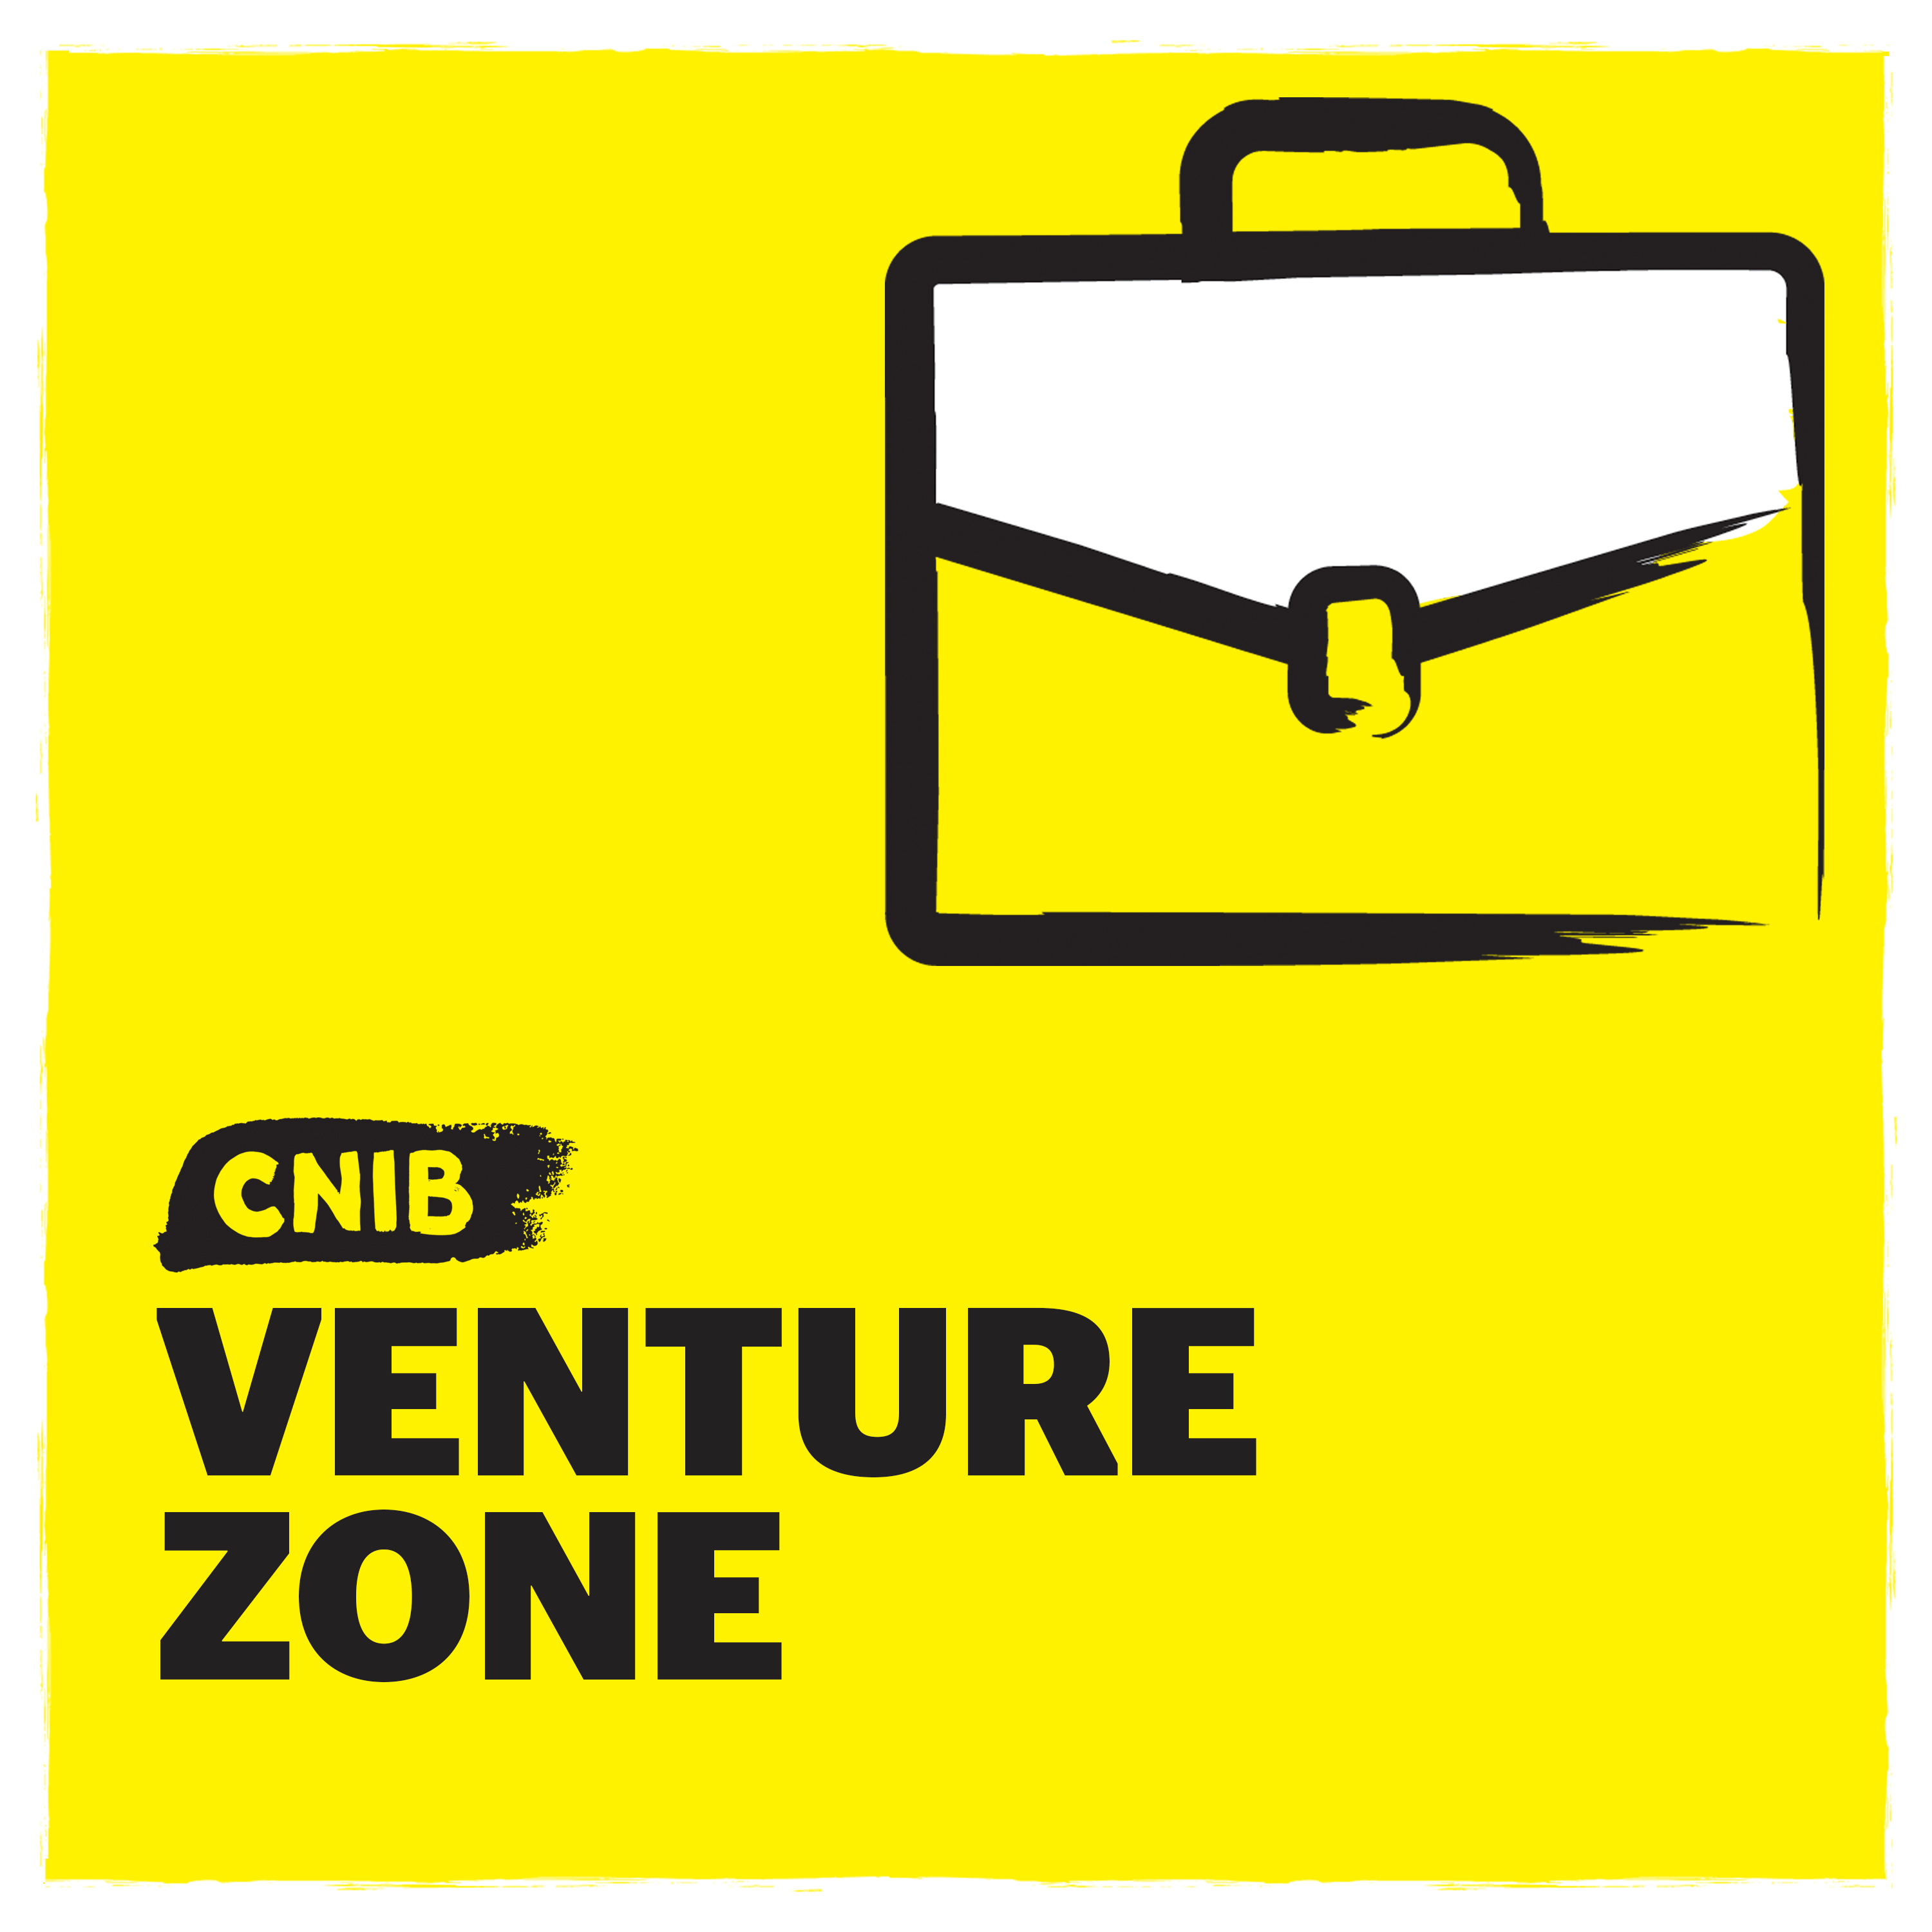 CNIB Venture Zone logo. An illustration of a briefcase on a yellow background. 